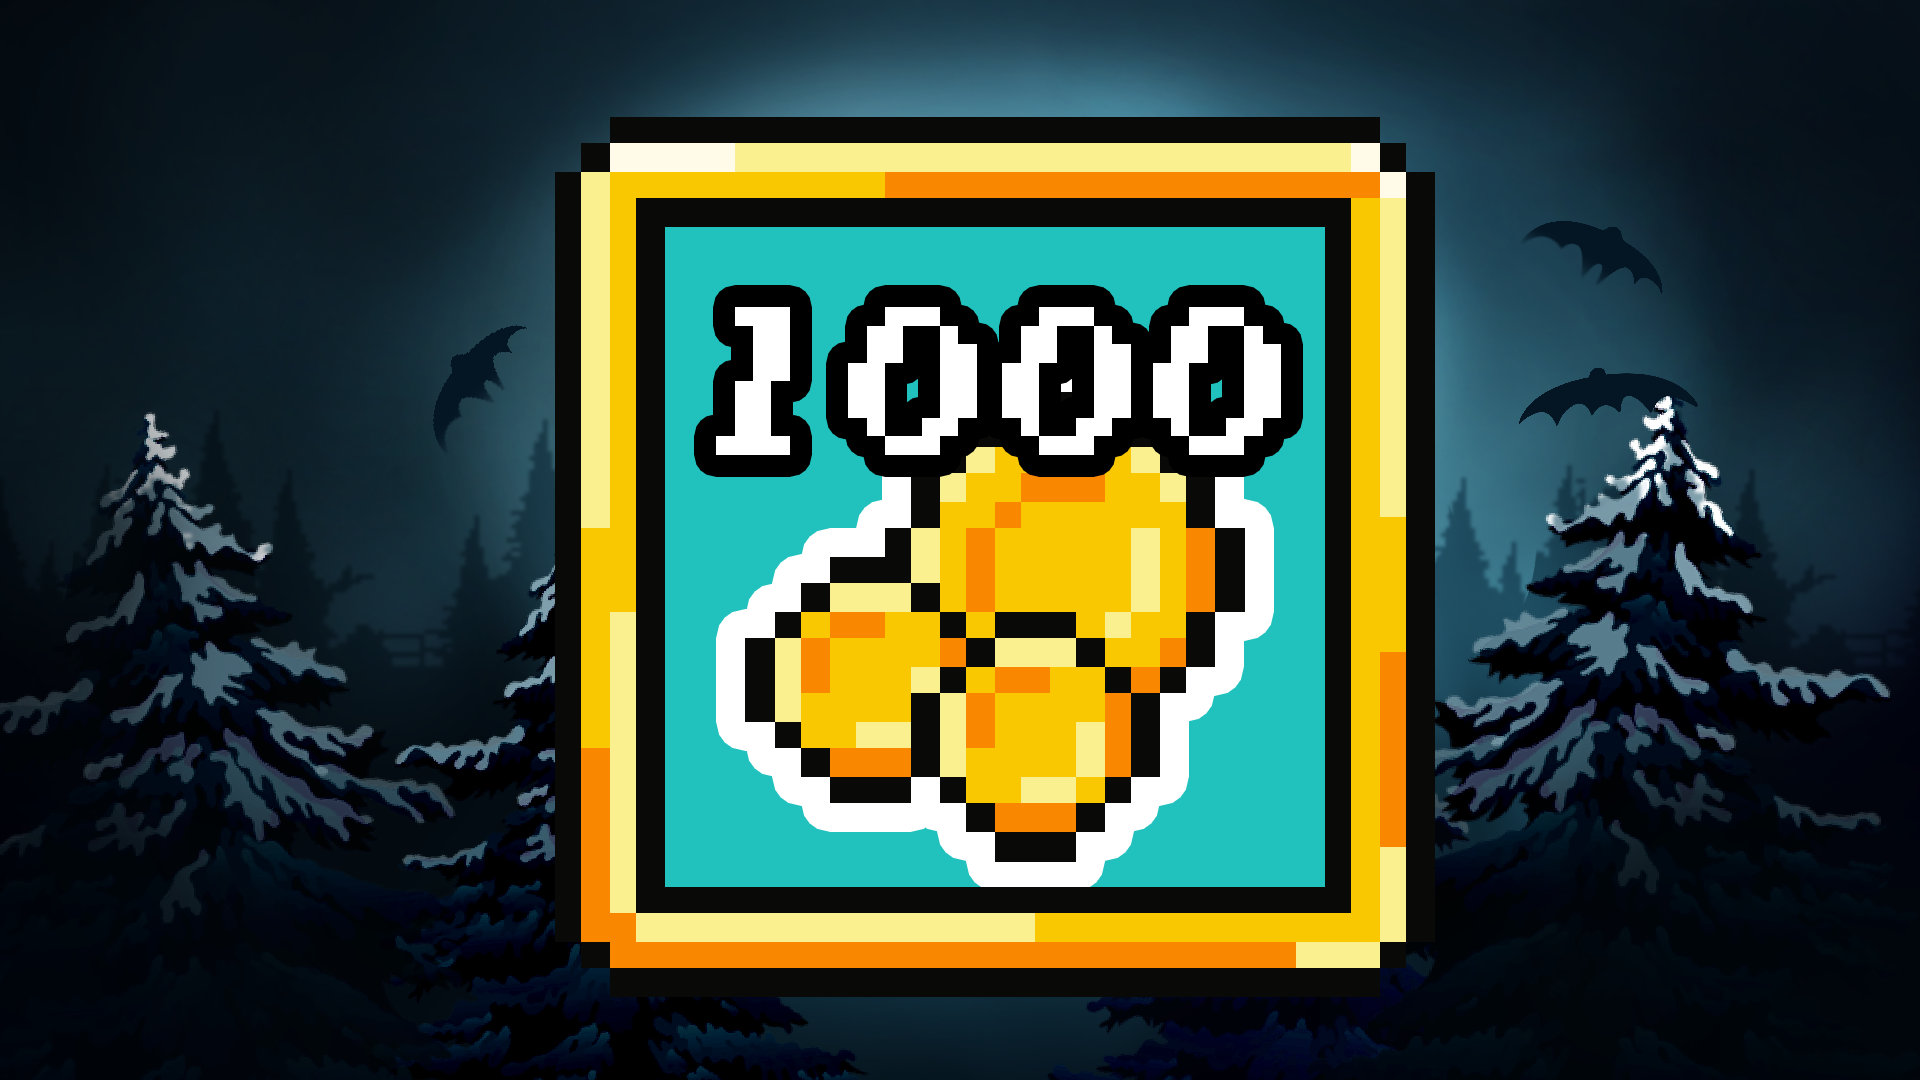 Icon for Coin Hoarder